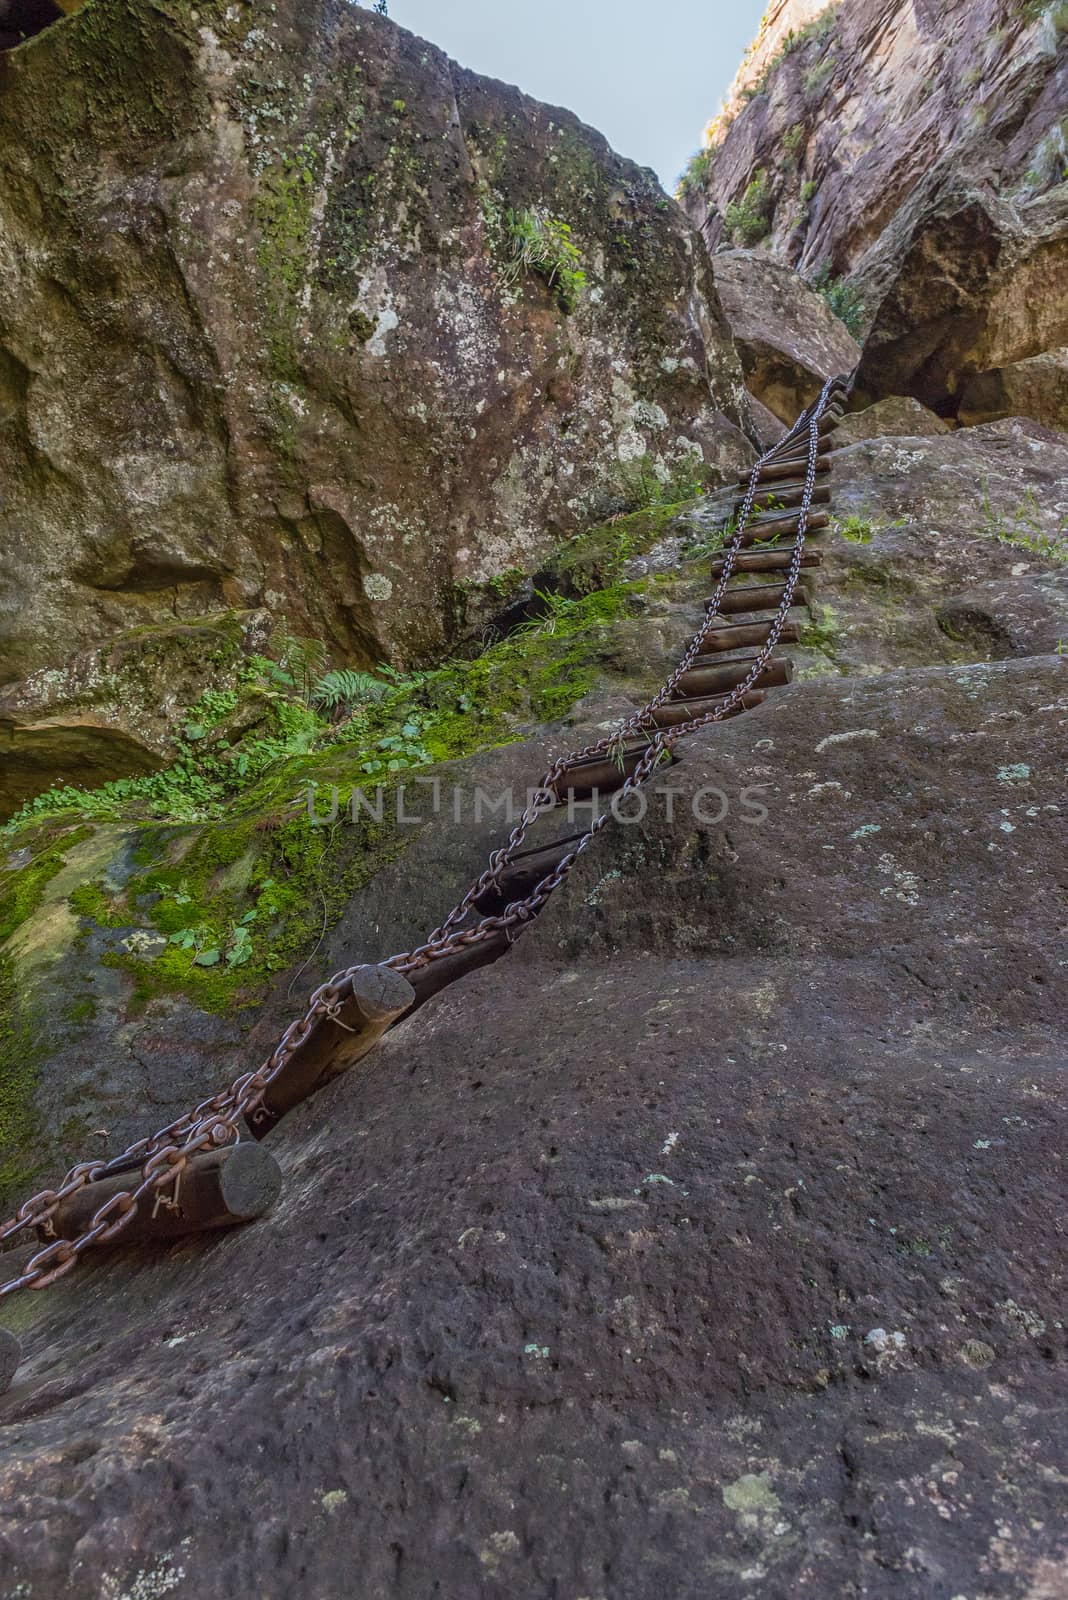 A chain ladder in the Crack near Mahai in the Drakensberg